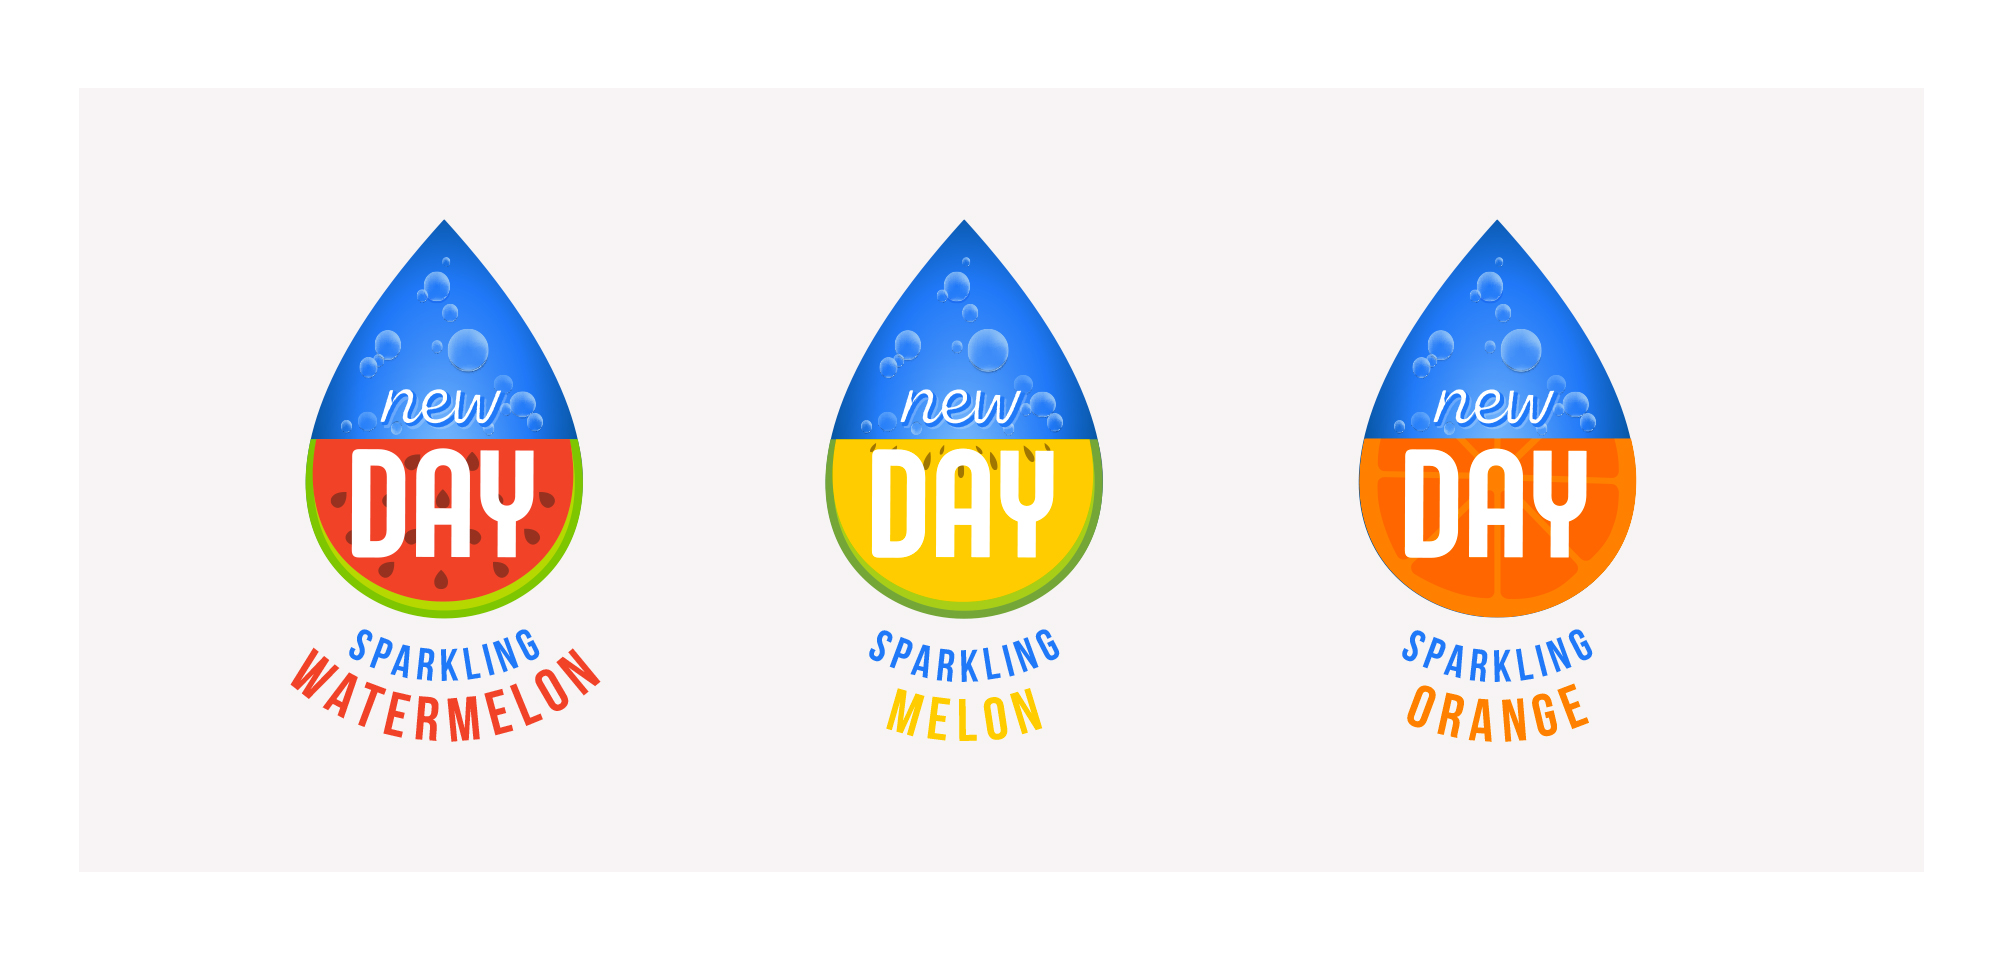 Logo proposal for the sparkling water drinks